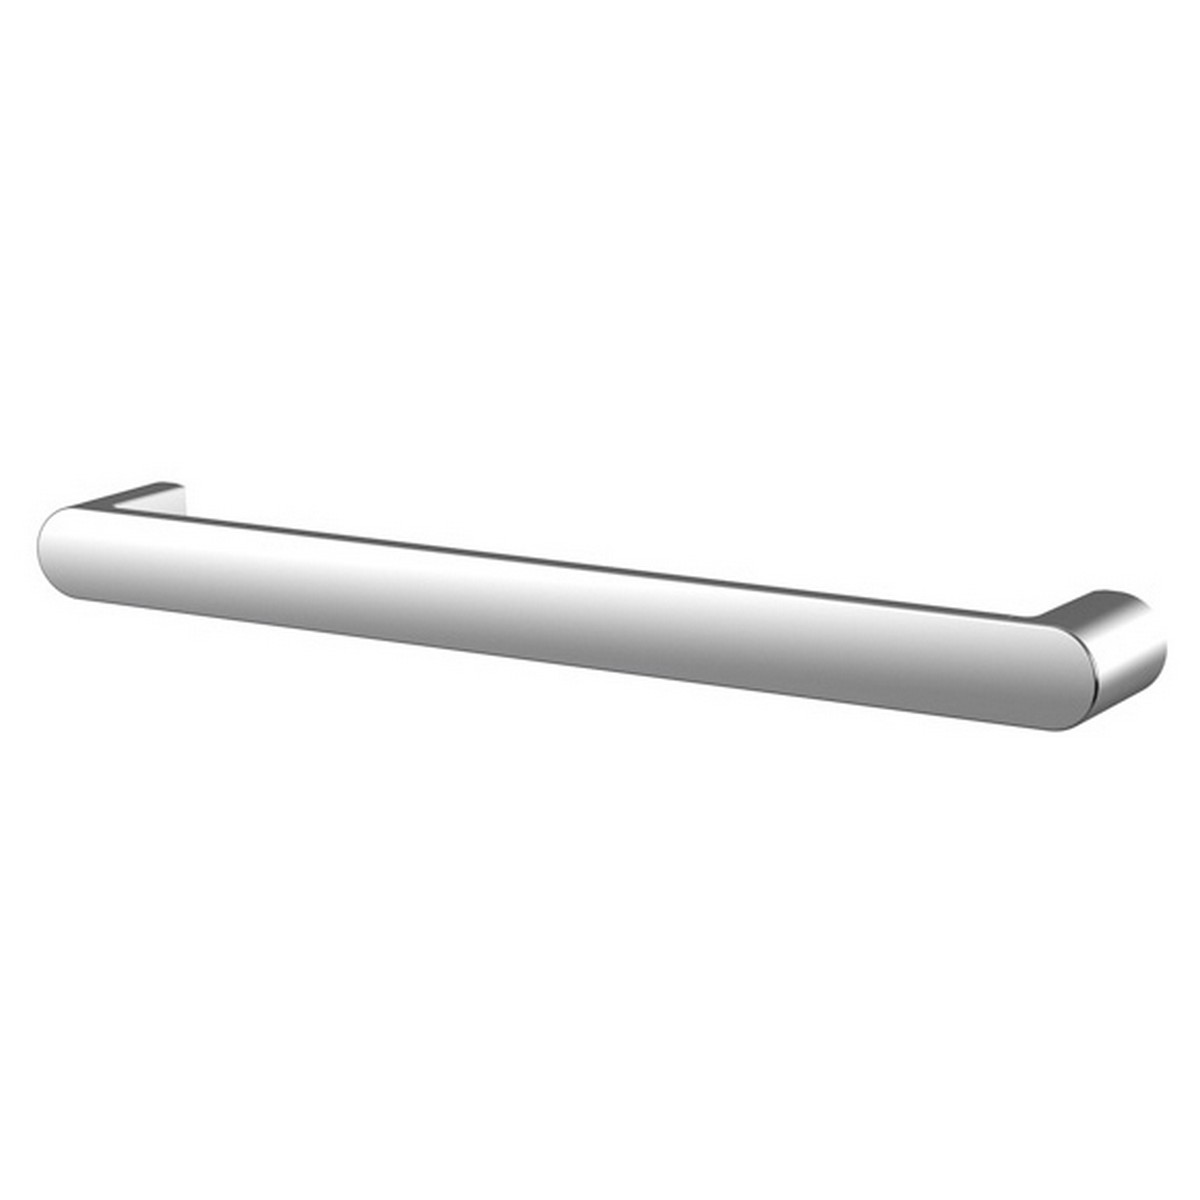 KEUCO 31601010700 ELEGANCE 28 5/8 INCH WALL MOUNTED SUPPORT RAIL IN POLISHED CHROME